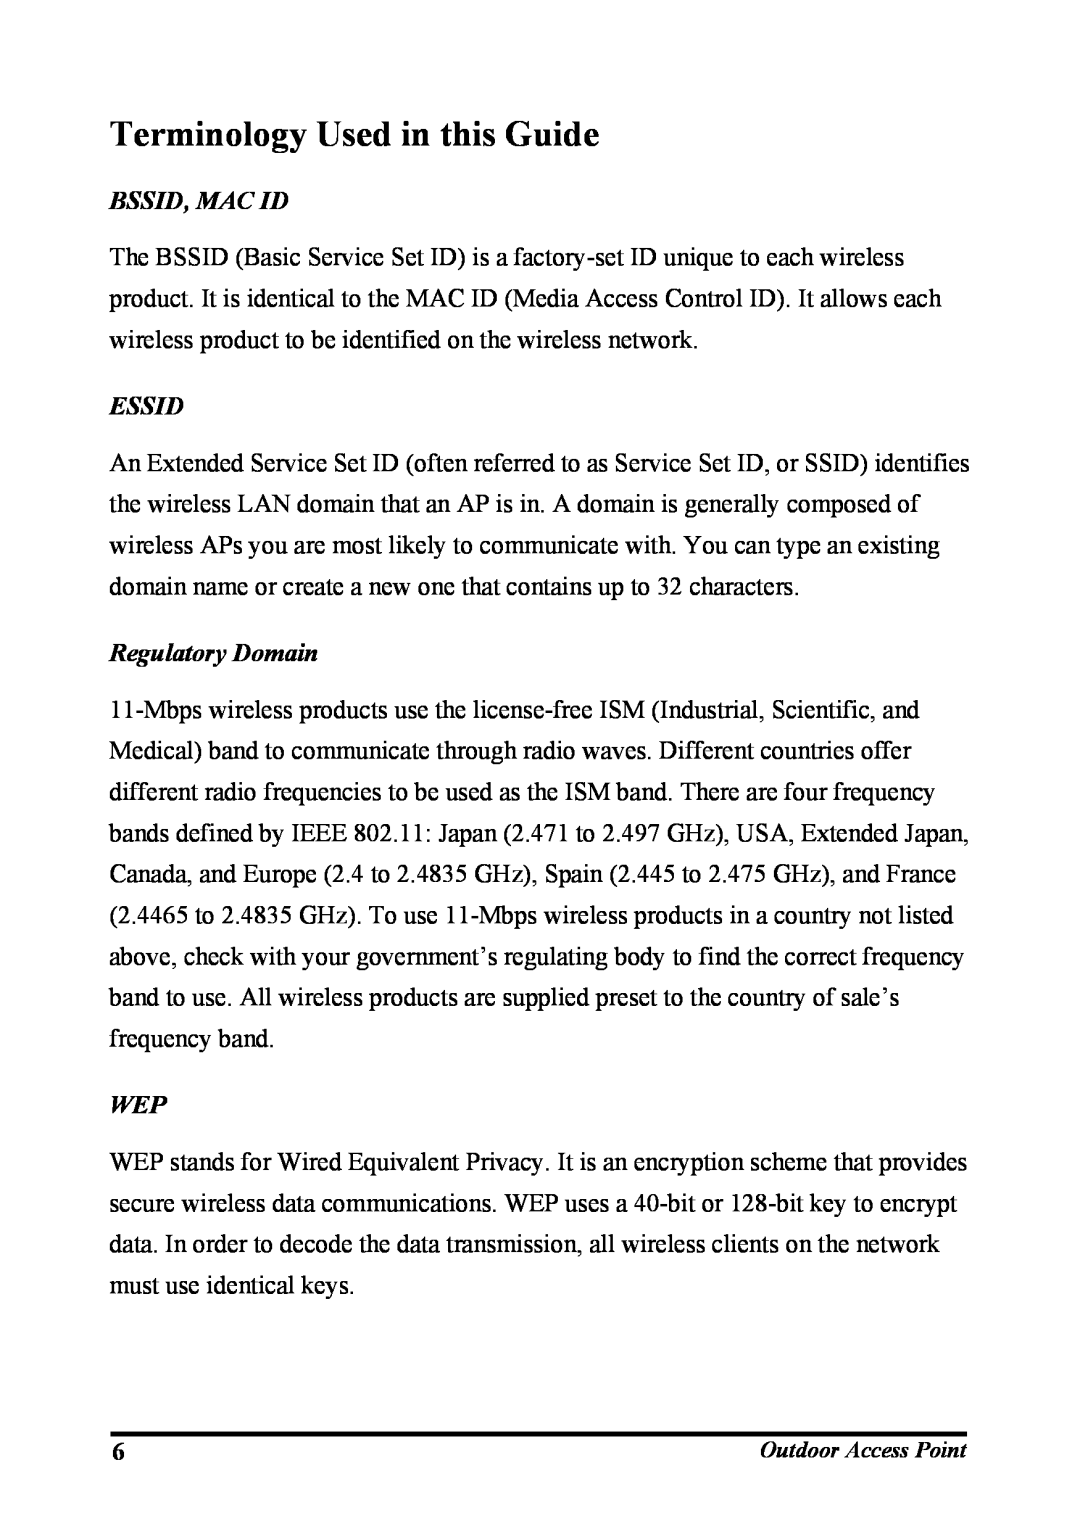 WHP Wireless WHP-1120, WHP-1100, WHP-1130 user manual Terminology Used in this Guide, Bssid, Mac Id, Essid, Regulatory Domain 